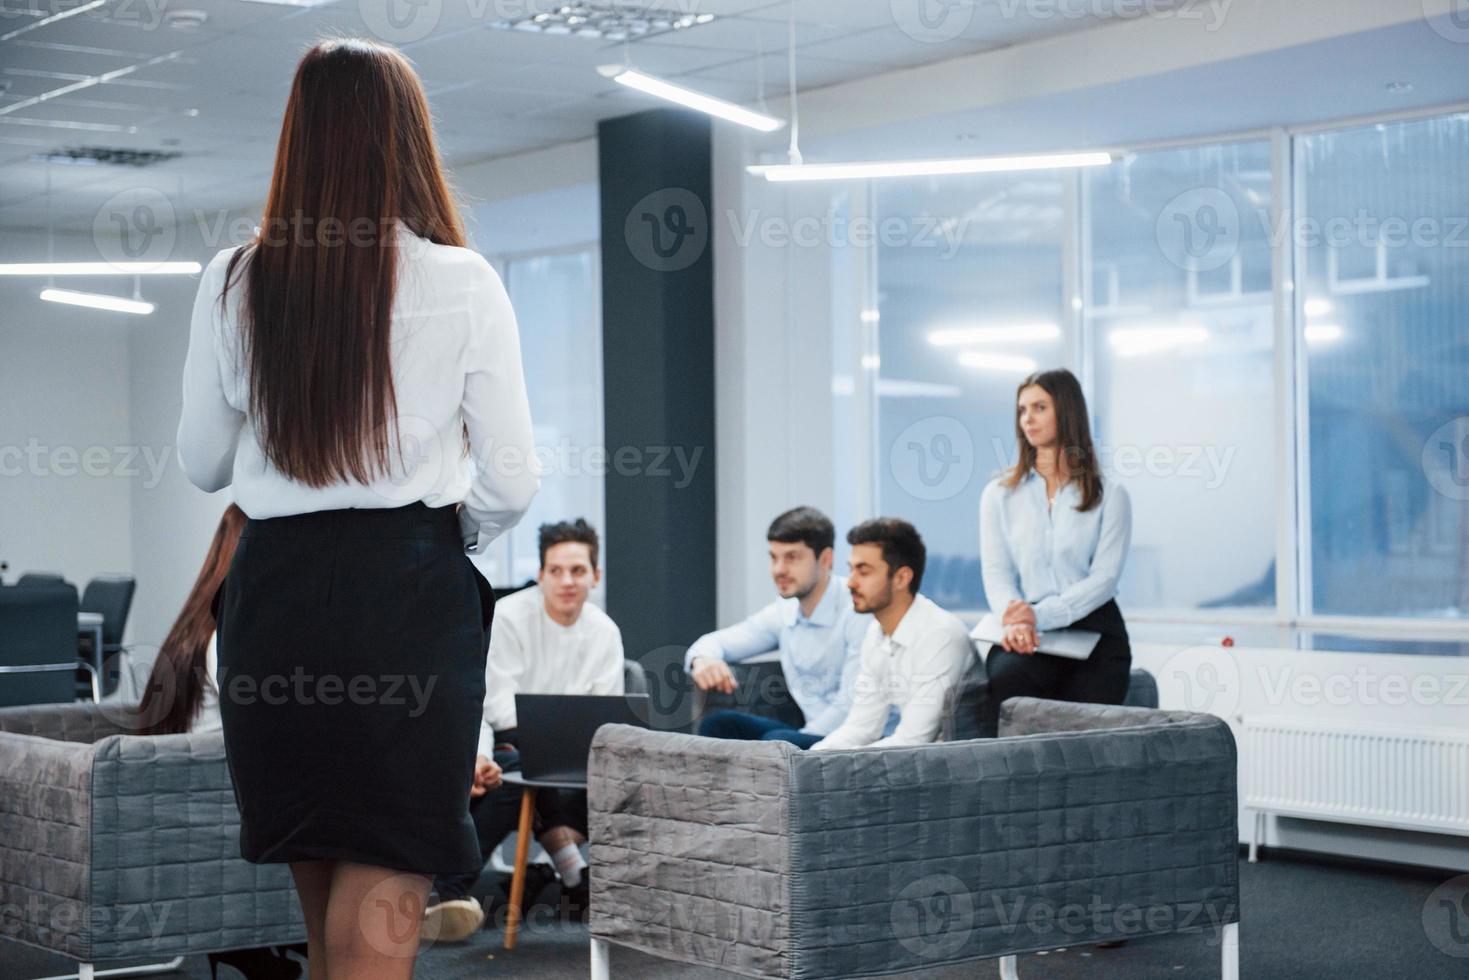 Girl in skirt is walking to the employees that sitting on sofa and waiting photo